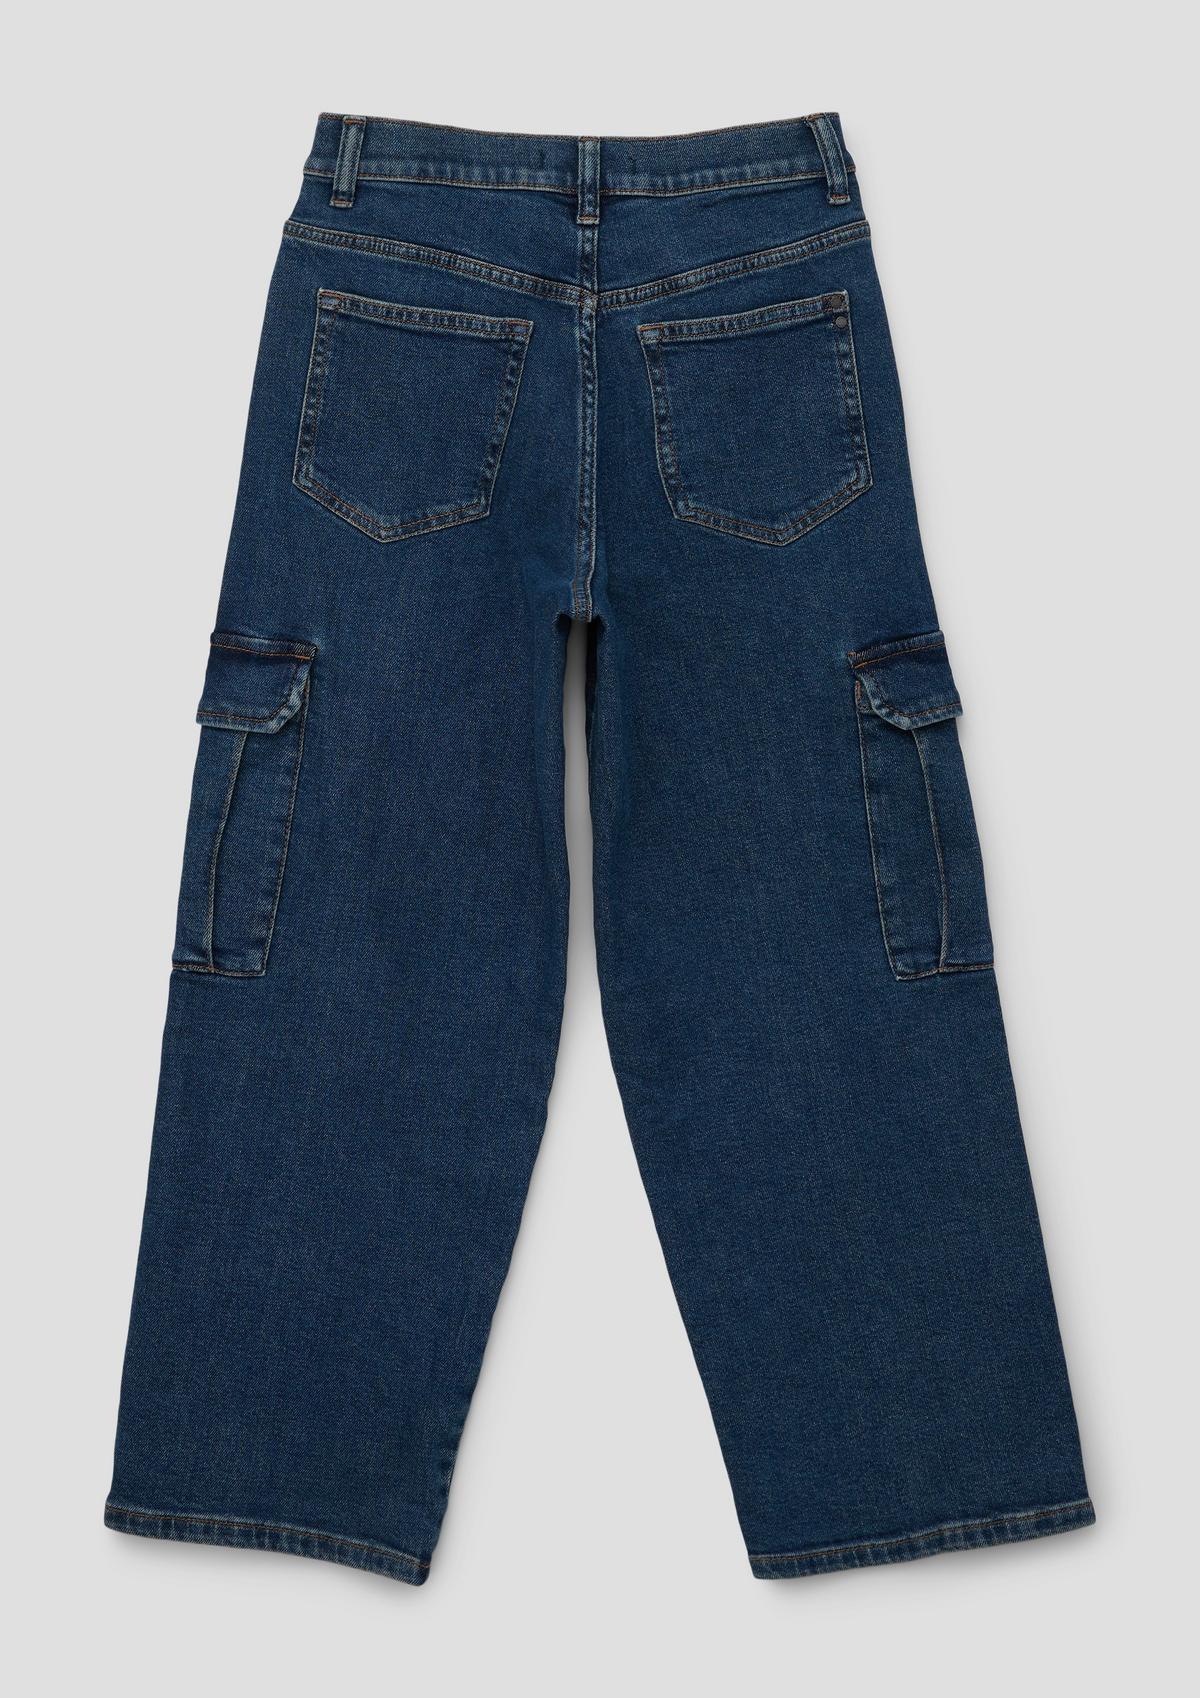 s.Oliver Jeans / relaxed fit / mid rise / wide leg / cargo pockets